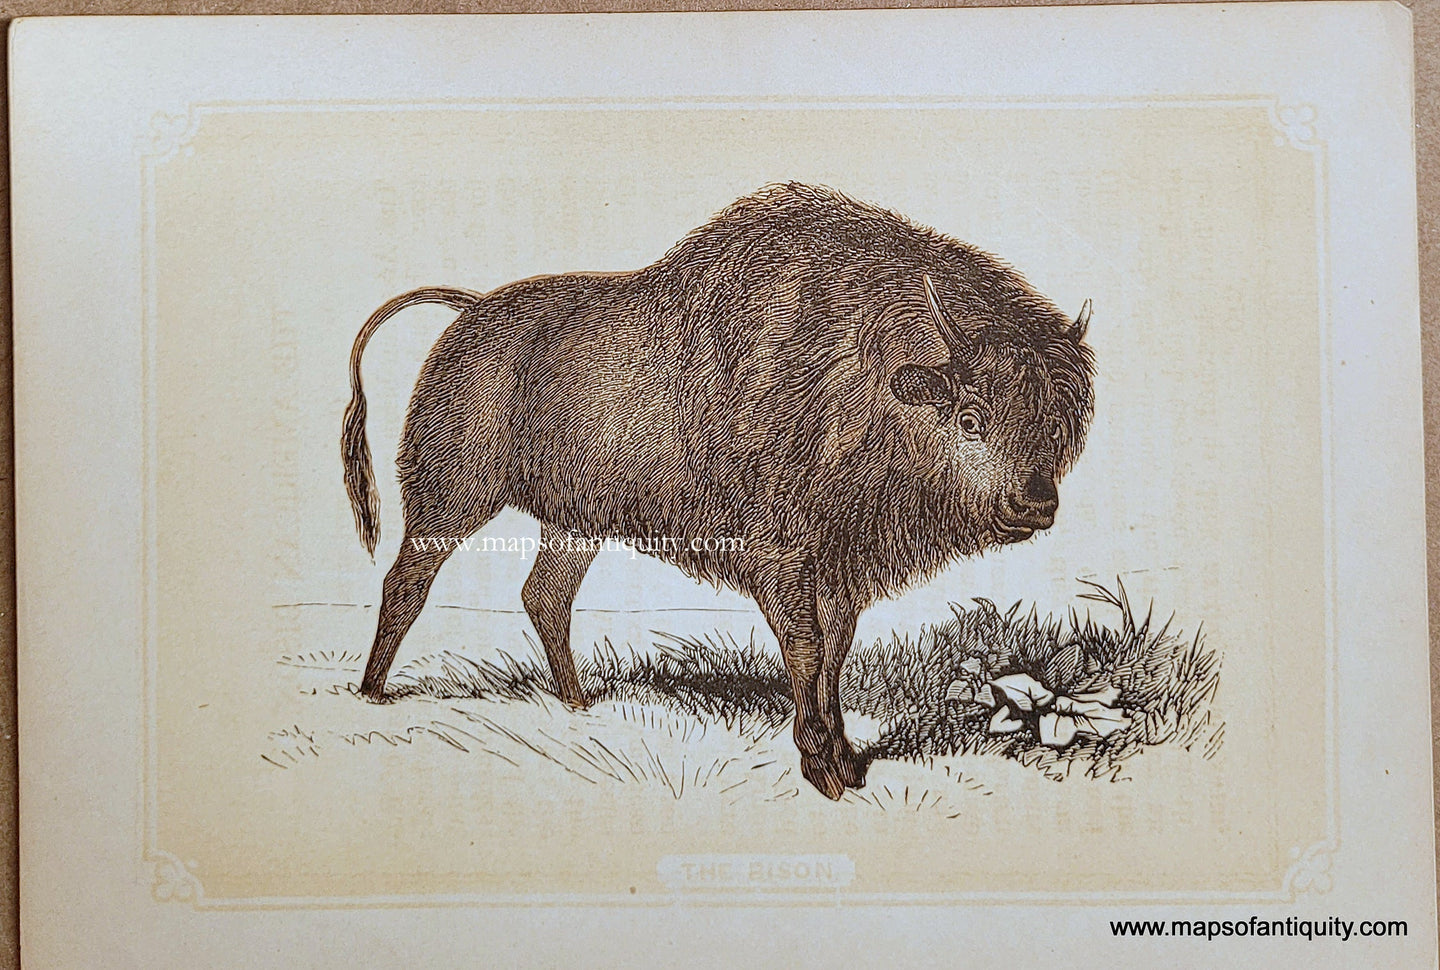 Genuine-Antique-Print-The-Bison-1850s-Tallis-Maps-Of-Antiquity